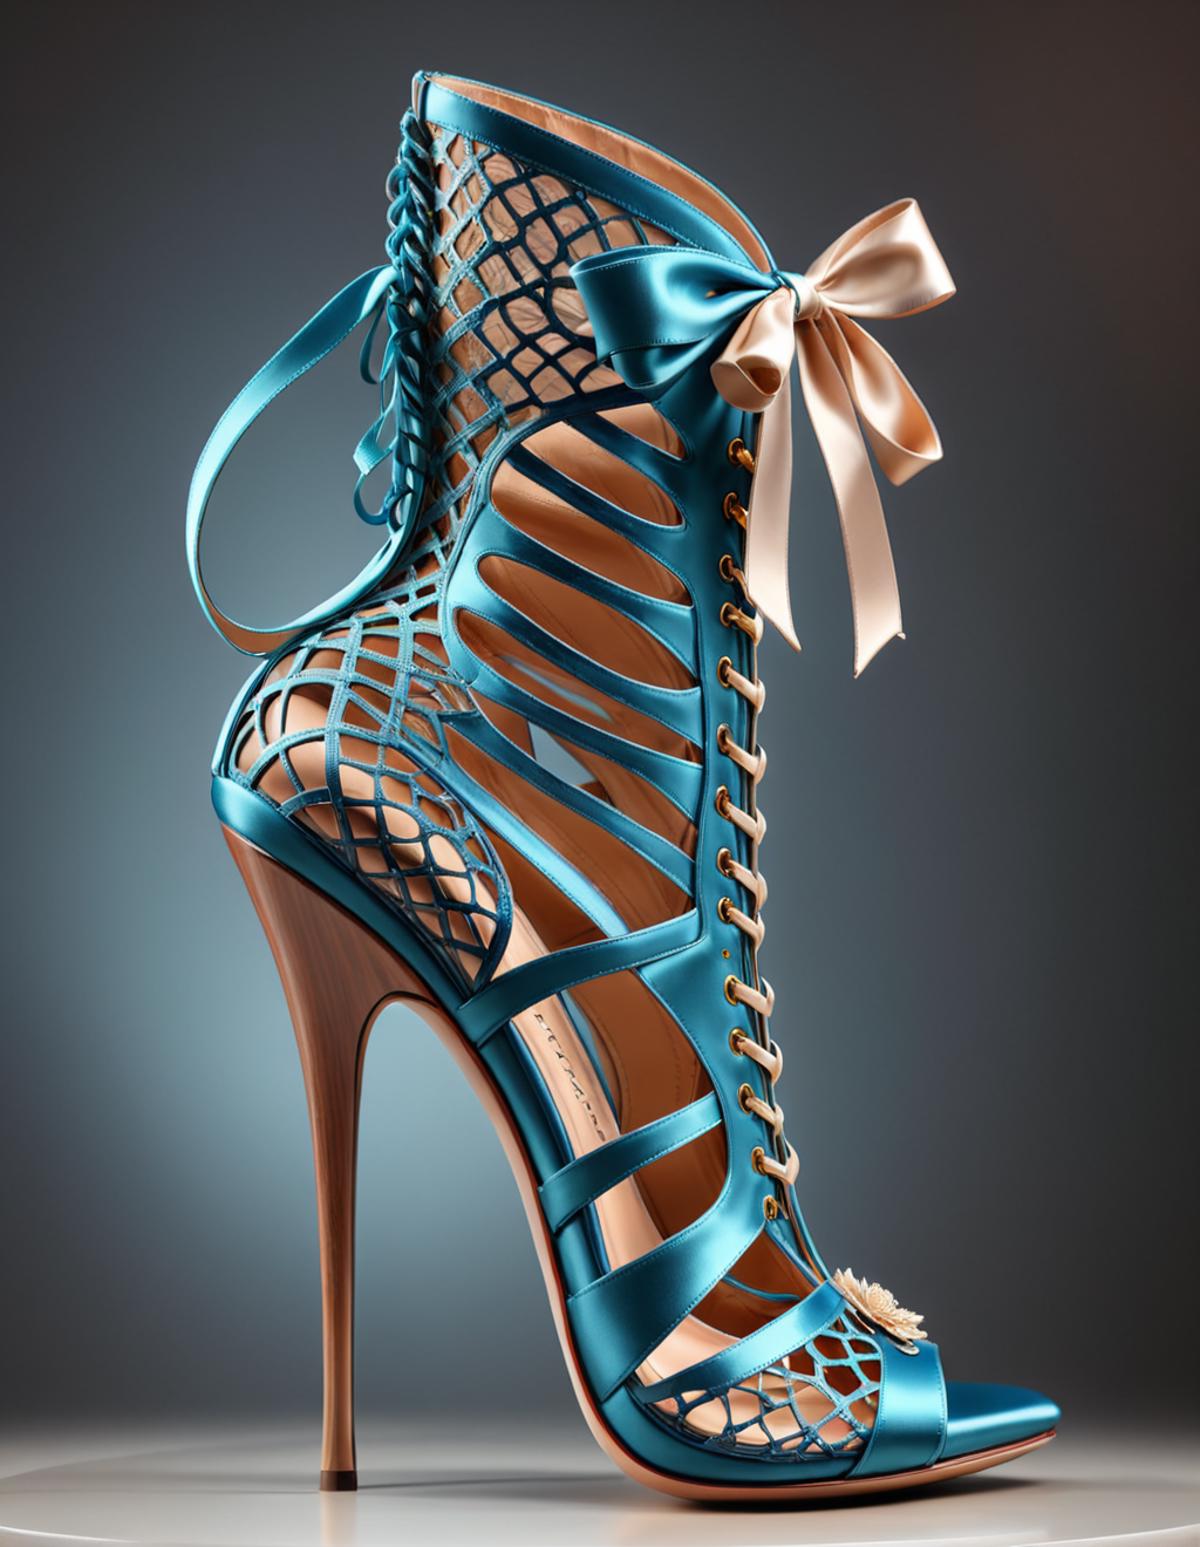 A high heeled shoe with blue and white laces and a bow.